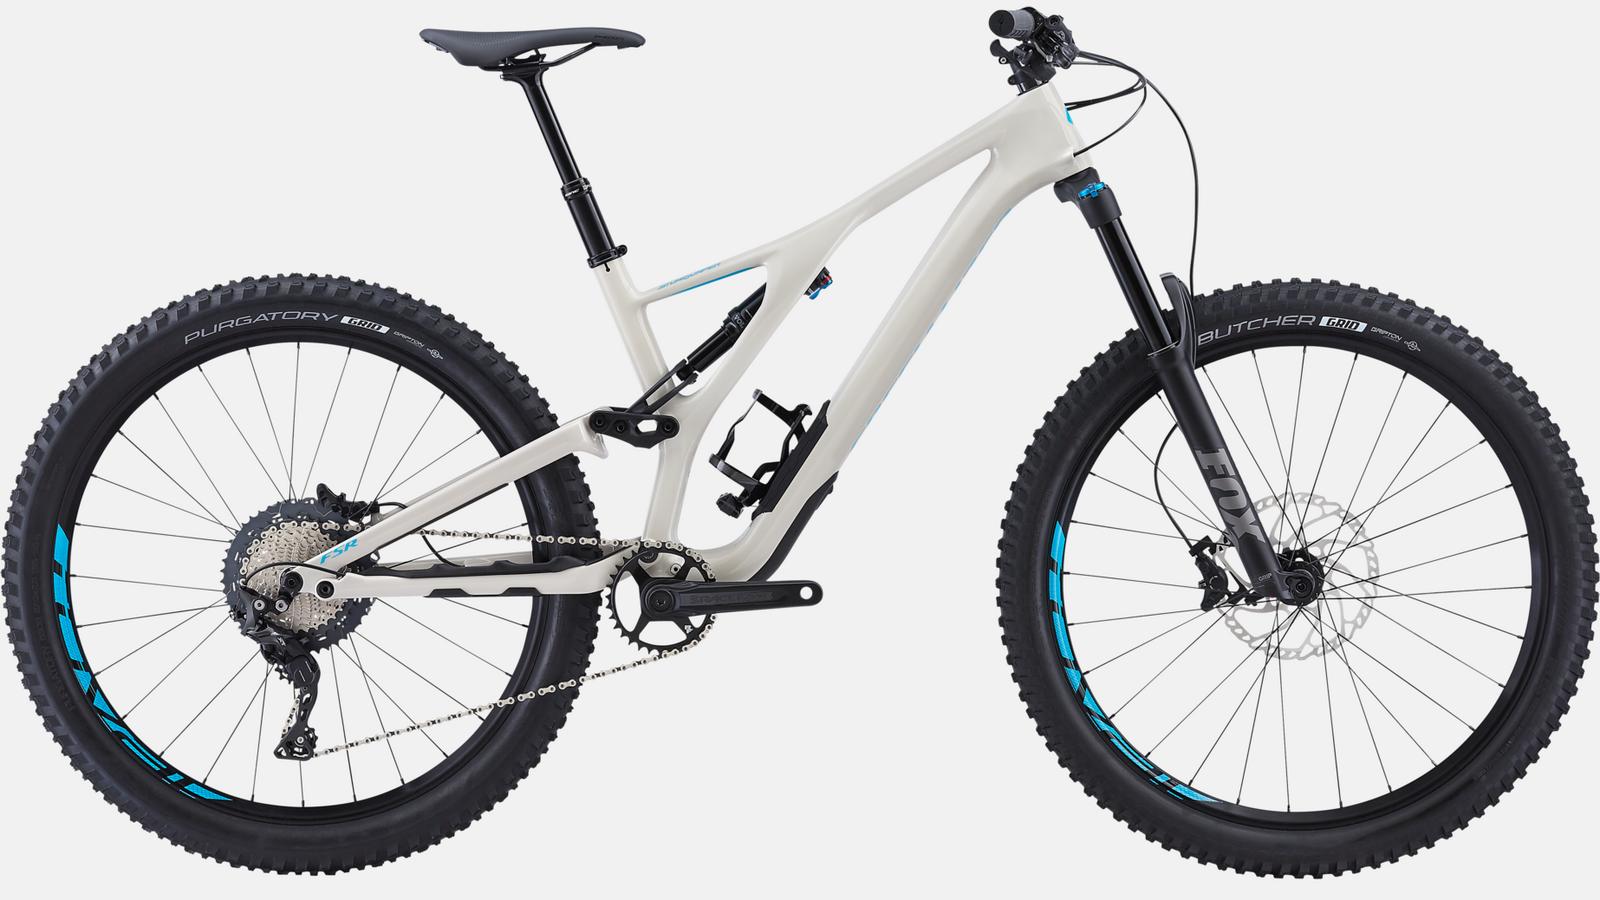 Paint for 2019 Specialized Men's Stumpjumper Comp Carbon 27.5 - Gloss White Mountains